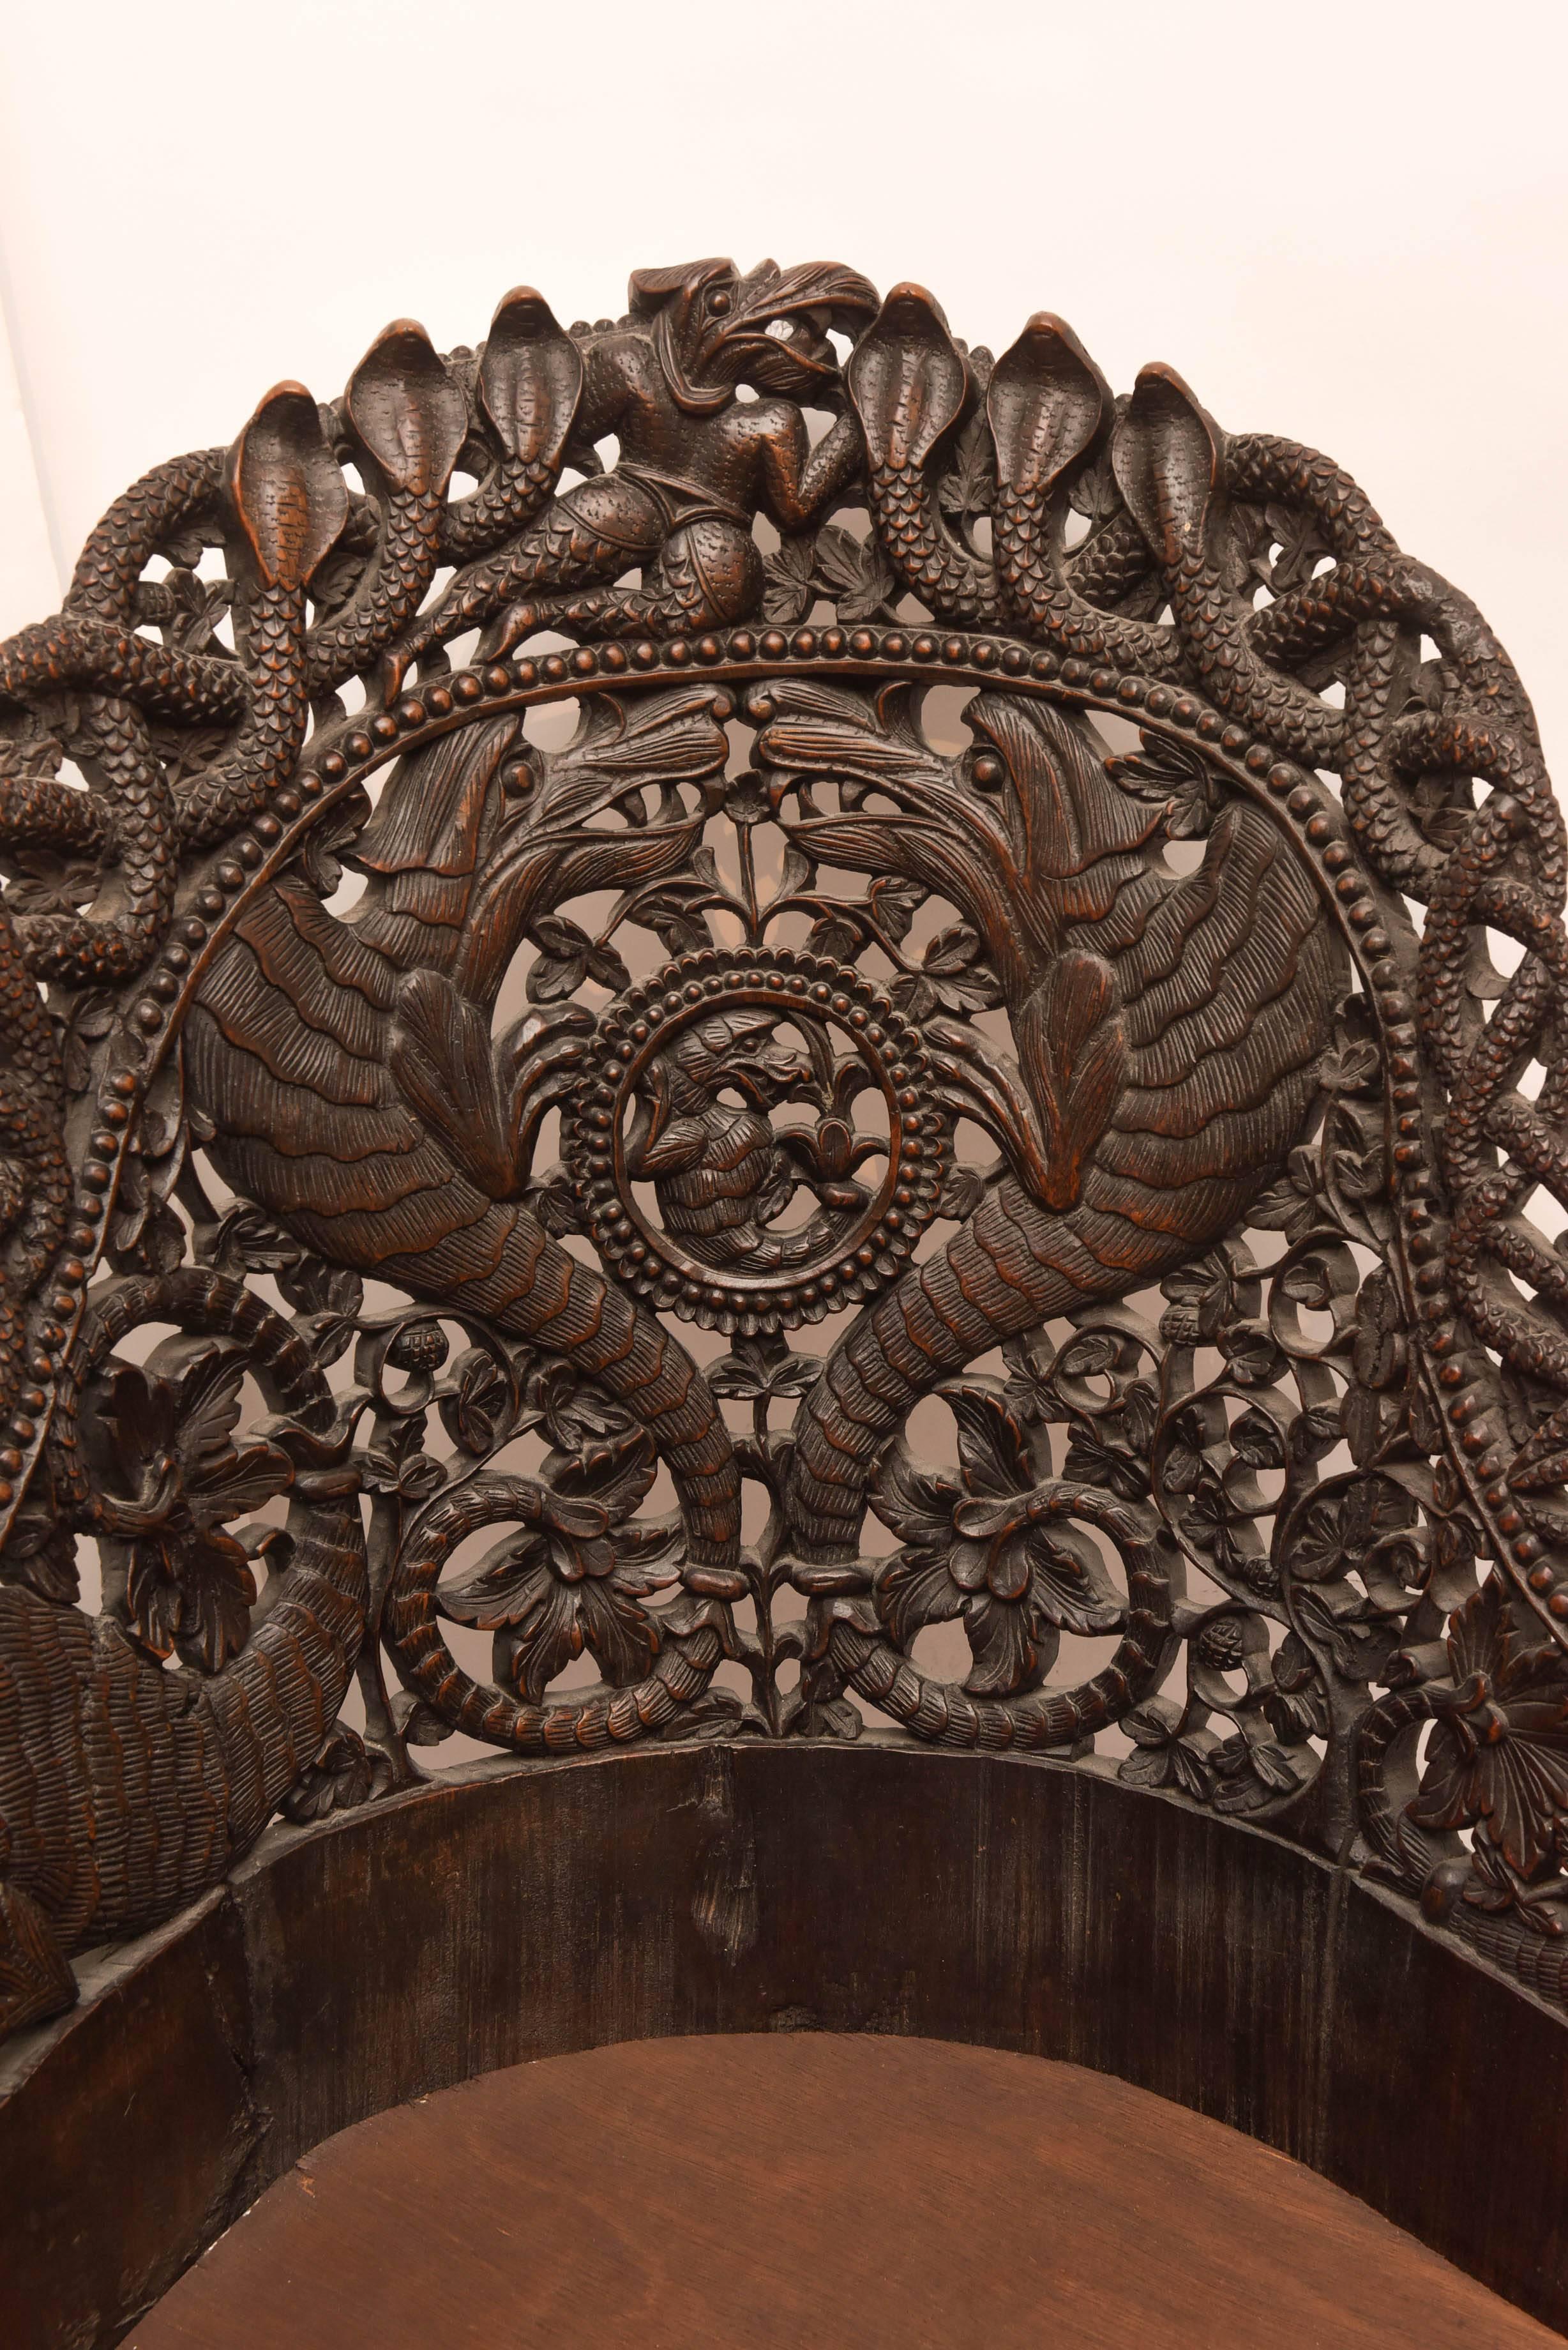 Superbly and lavishly carved. Unusual imaginative theme with a "surround" of cobras, intricately carved alligators, tigers and elephant form "feet".